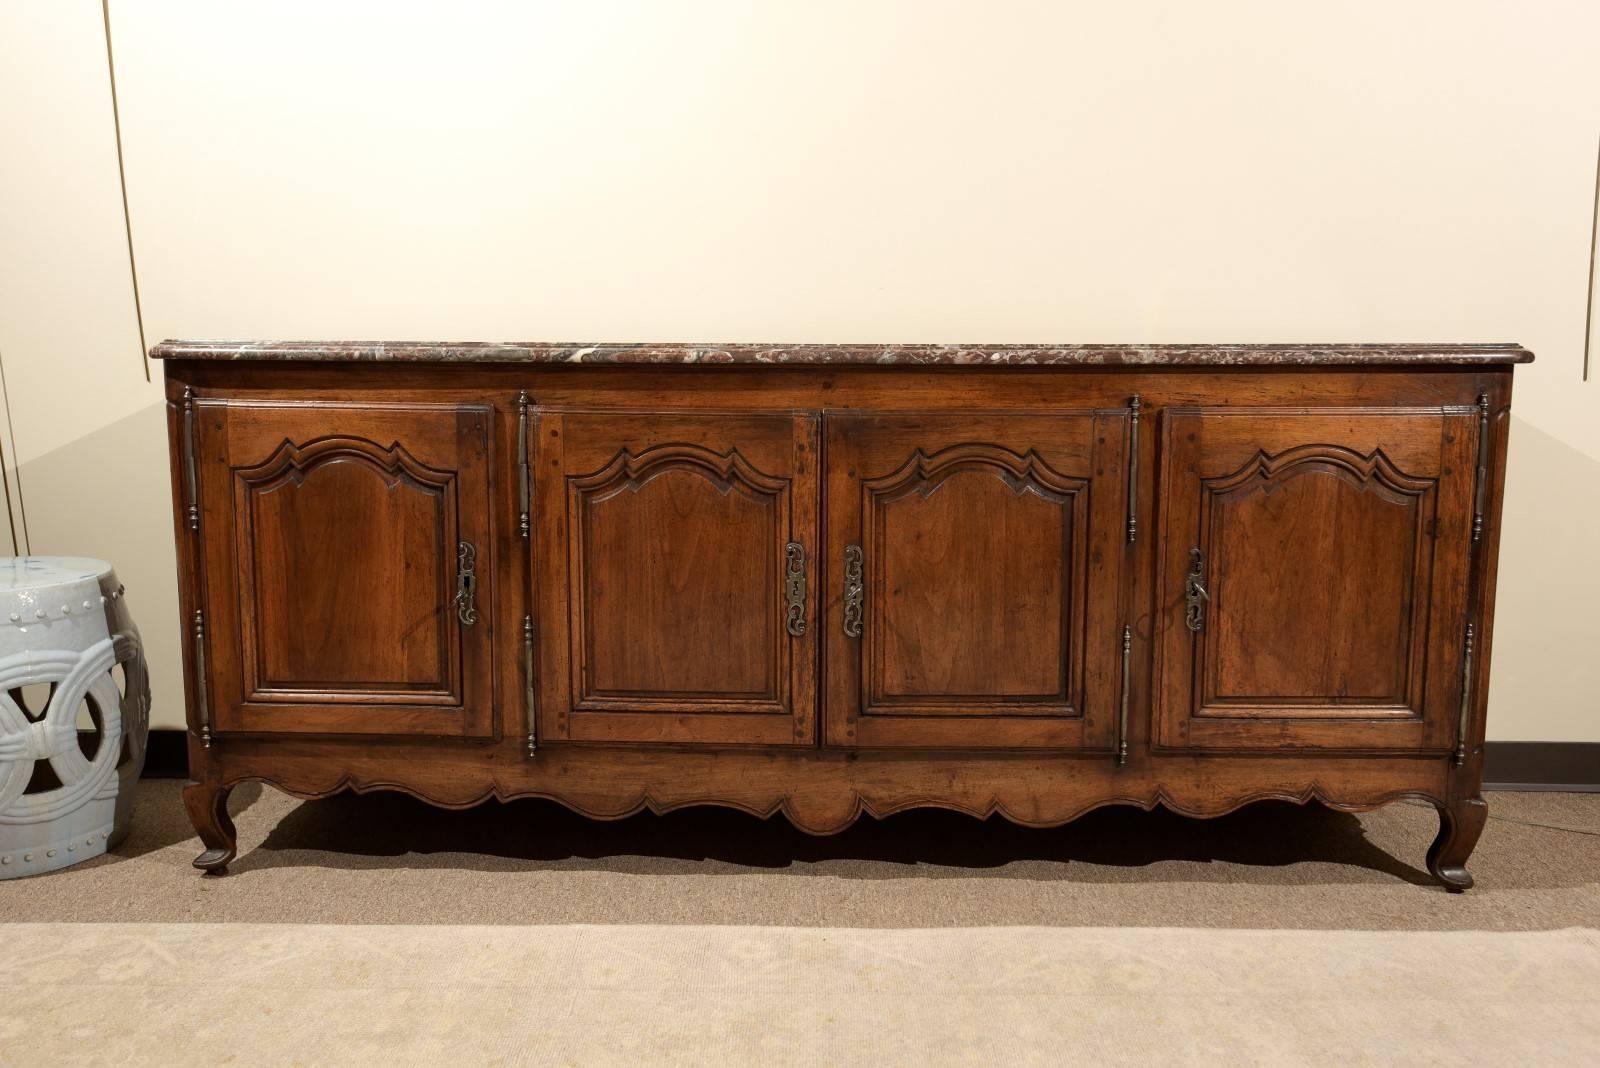 18th century Louis XV walnut enfilade, circa 1760
The beautiful enfilade was made in the Classic style of Louis XV furniture.
Due to it's length, the four doors are split with a pair in the middle and then the two ends open individually. The walnut